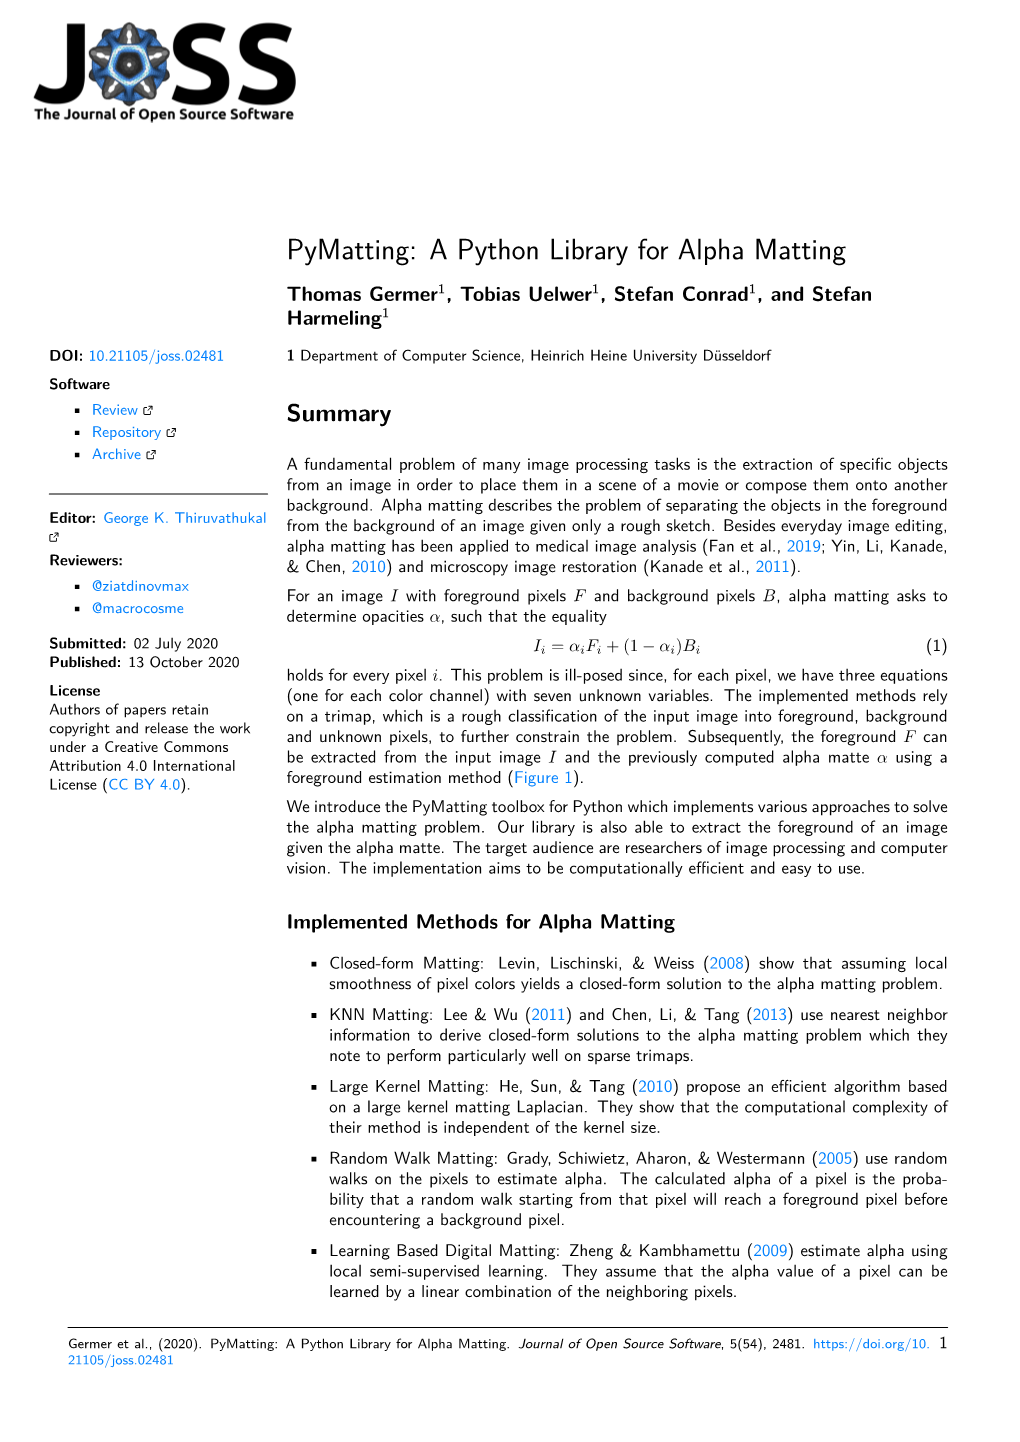 A Python Library for Alpha Matting Thomas Germer1, Tobias Uelwer1, Stefan Conrad1, and Stefan Harmeling1